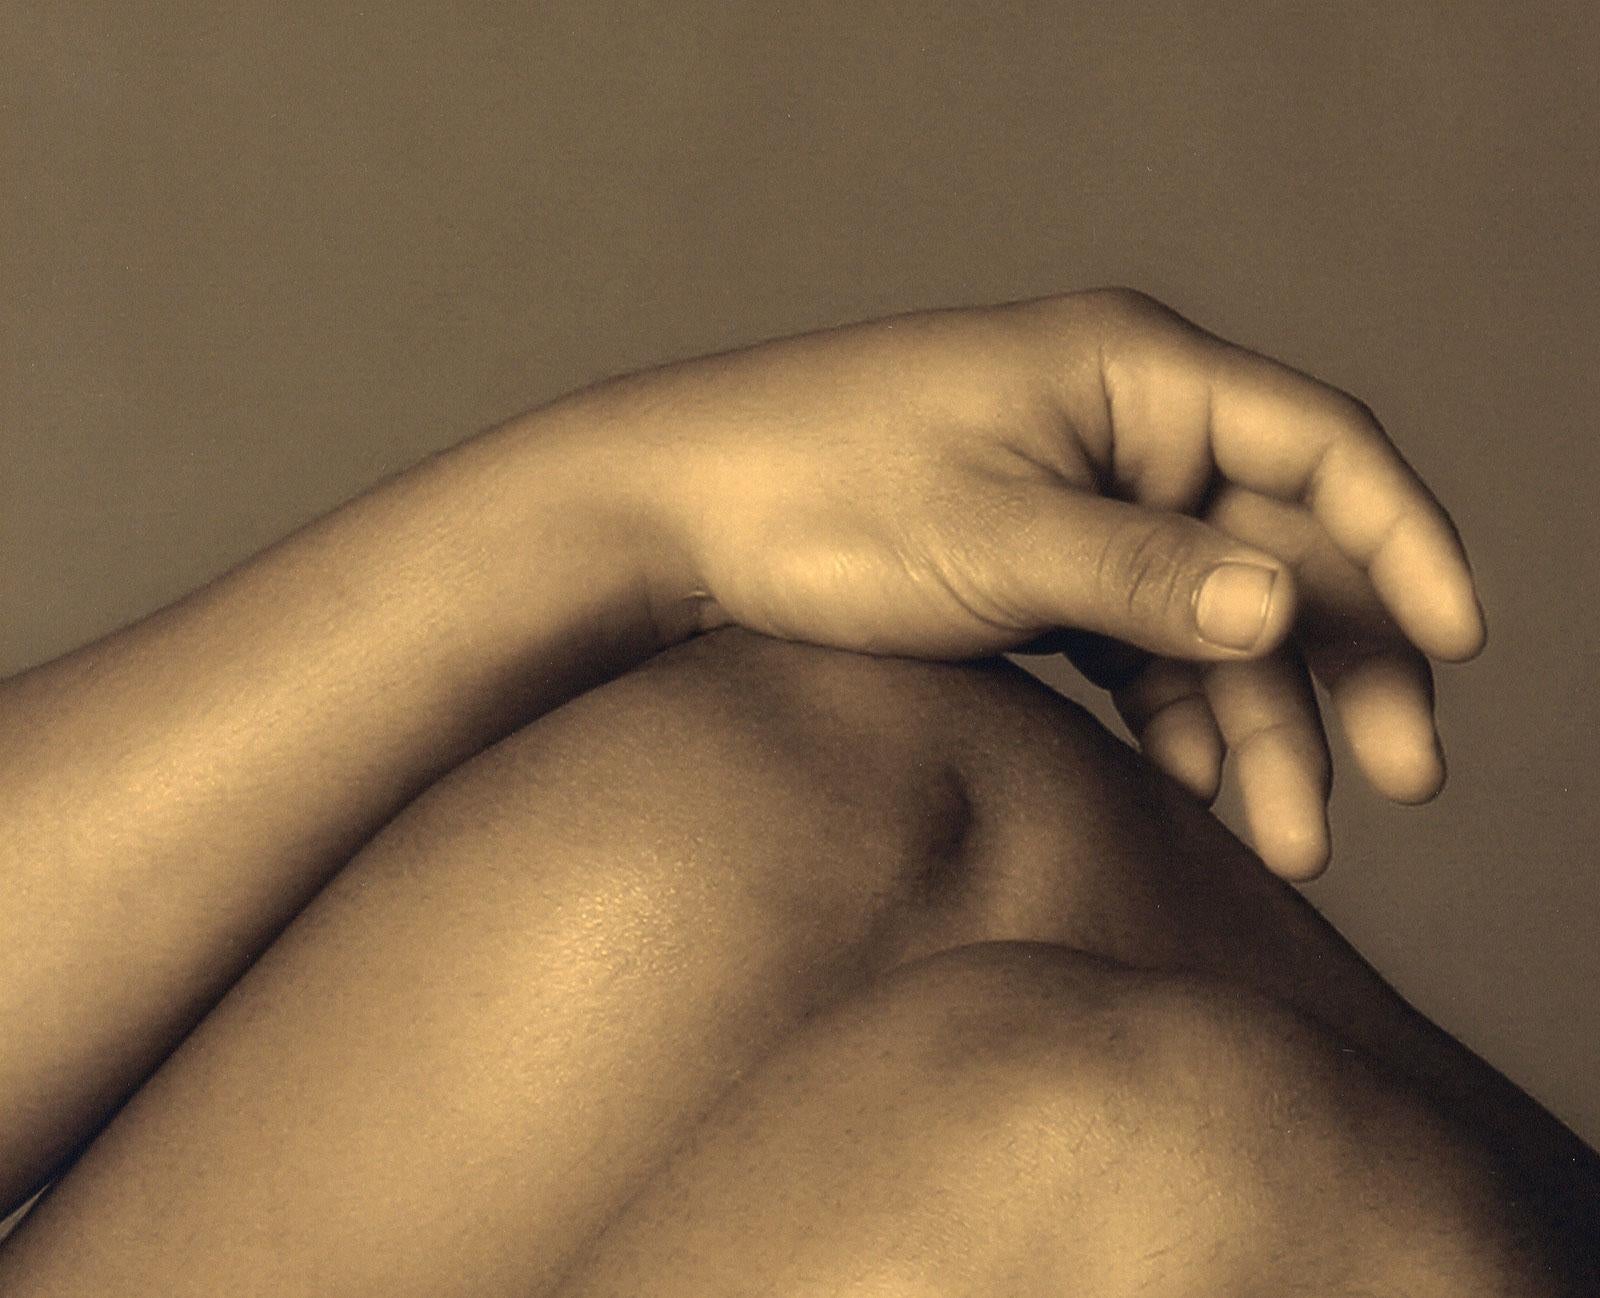 Male Nude #111 (a young nude male with his muscular legs drawn with hand atop) - Photograph by Dylan Ricci